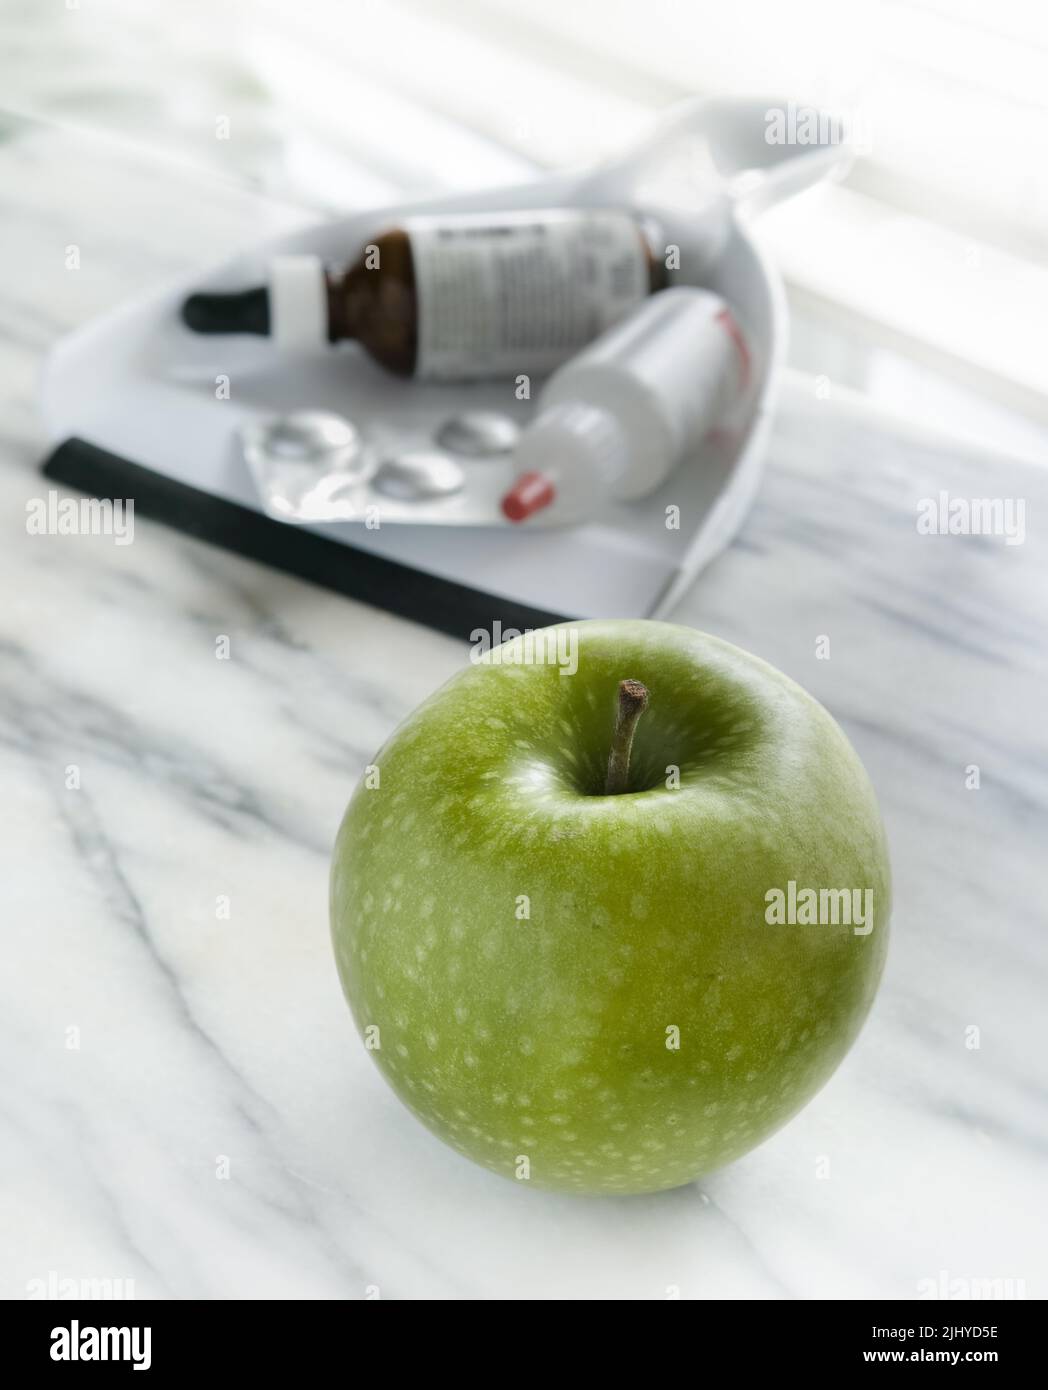 Front, a green apple, background, a dust pan with various medicine containers. Stock Photo